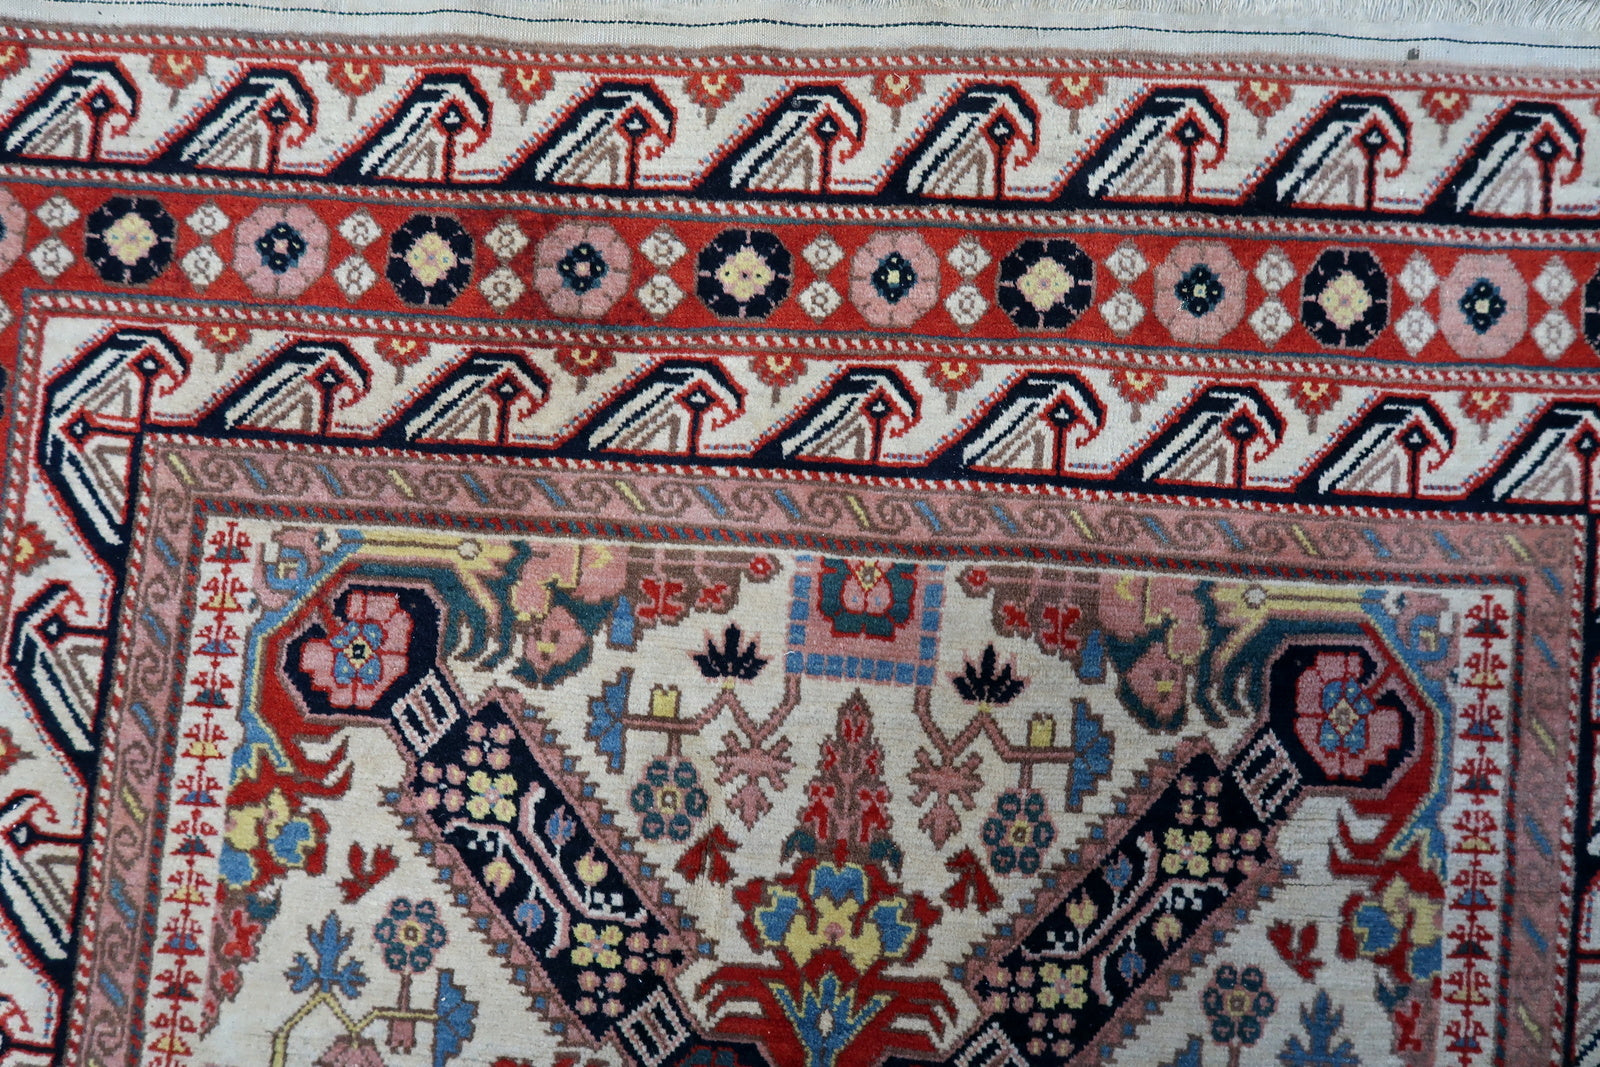 Detailed view of the soft wool texture and vibrant red accents on the rug